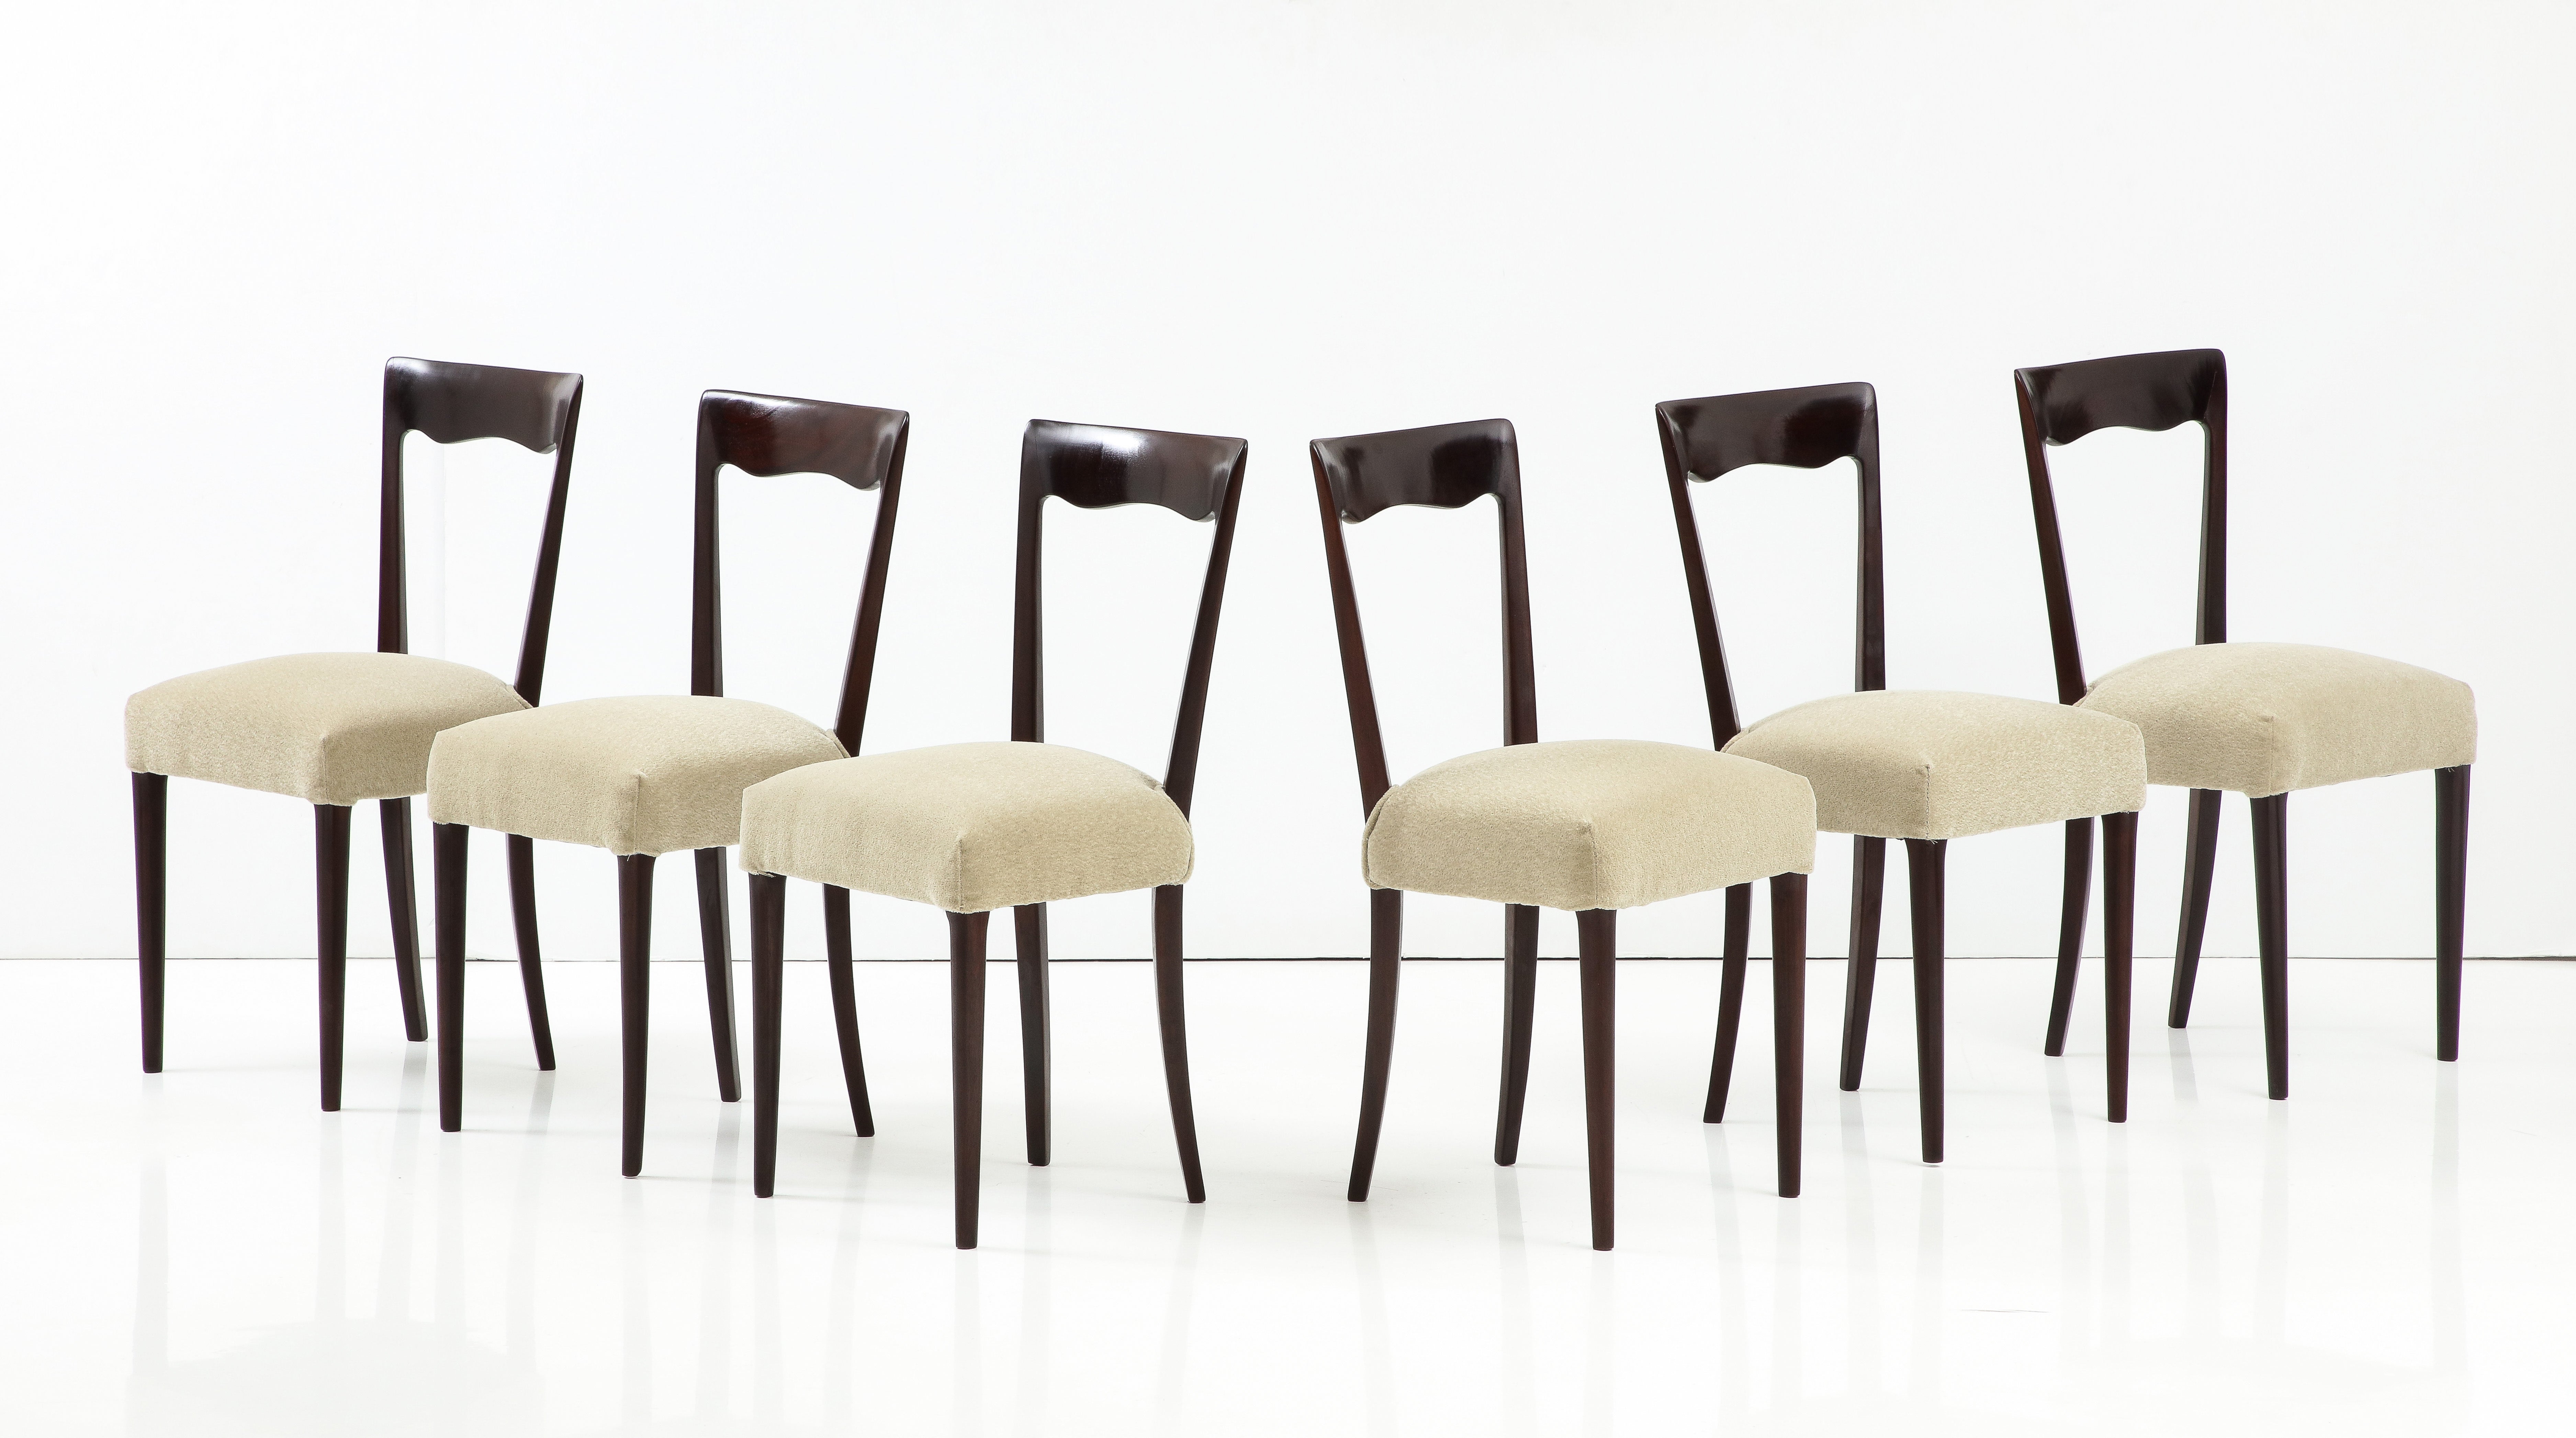 1950's Modernist Italian Dining Chairs In Mohair Upholstery